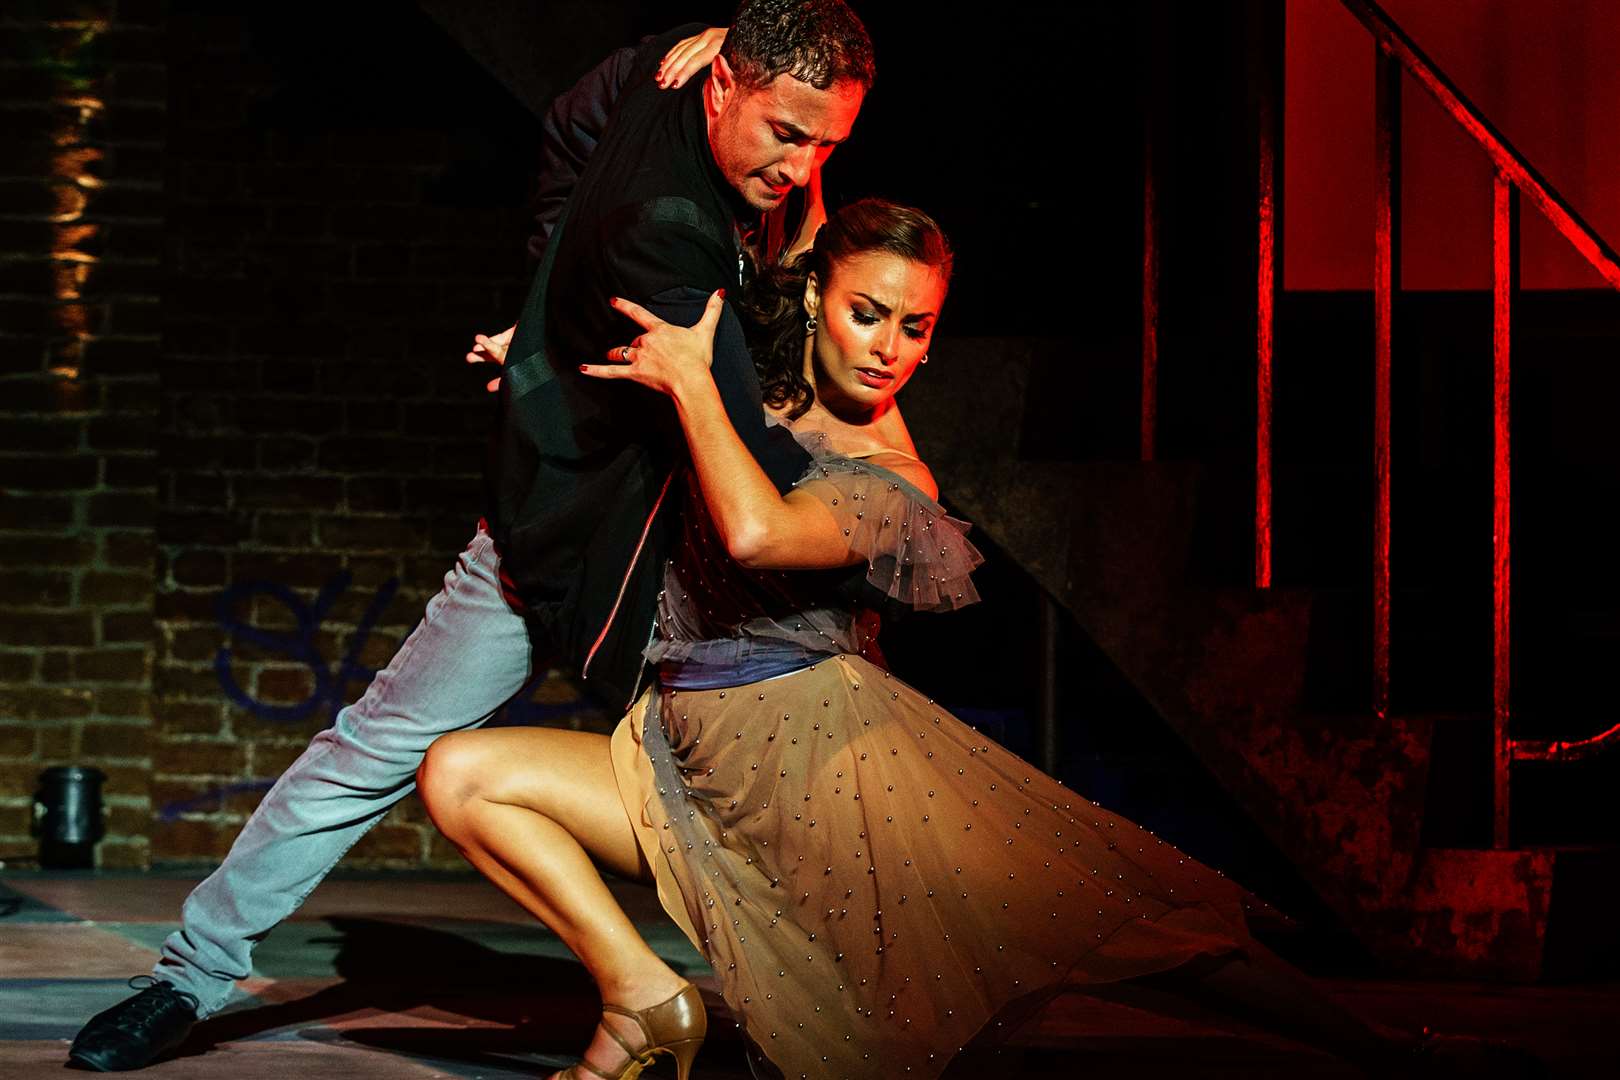 Vincent Simone and Flavia Cacace in Tango Moderno, photo by Manuel Harlan (1244049)